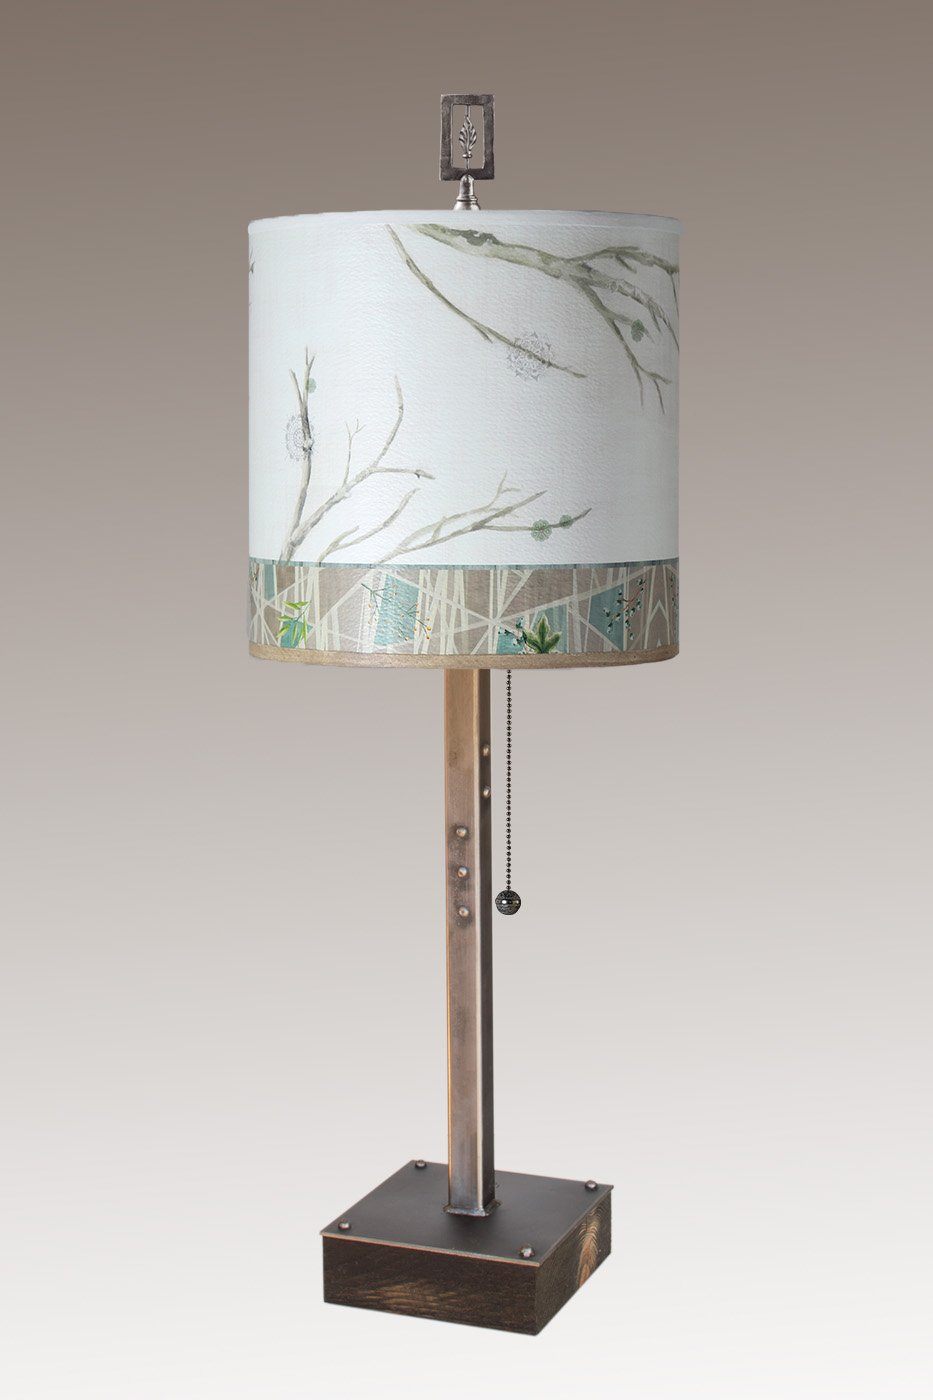 Janna Ugone & Co Table Lamps Steel Table Lamp on Wood with Medium Drum Shade in Prism Branch